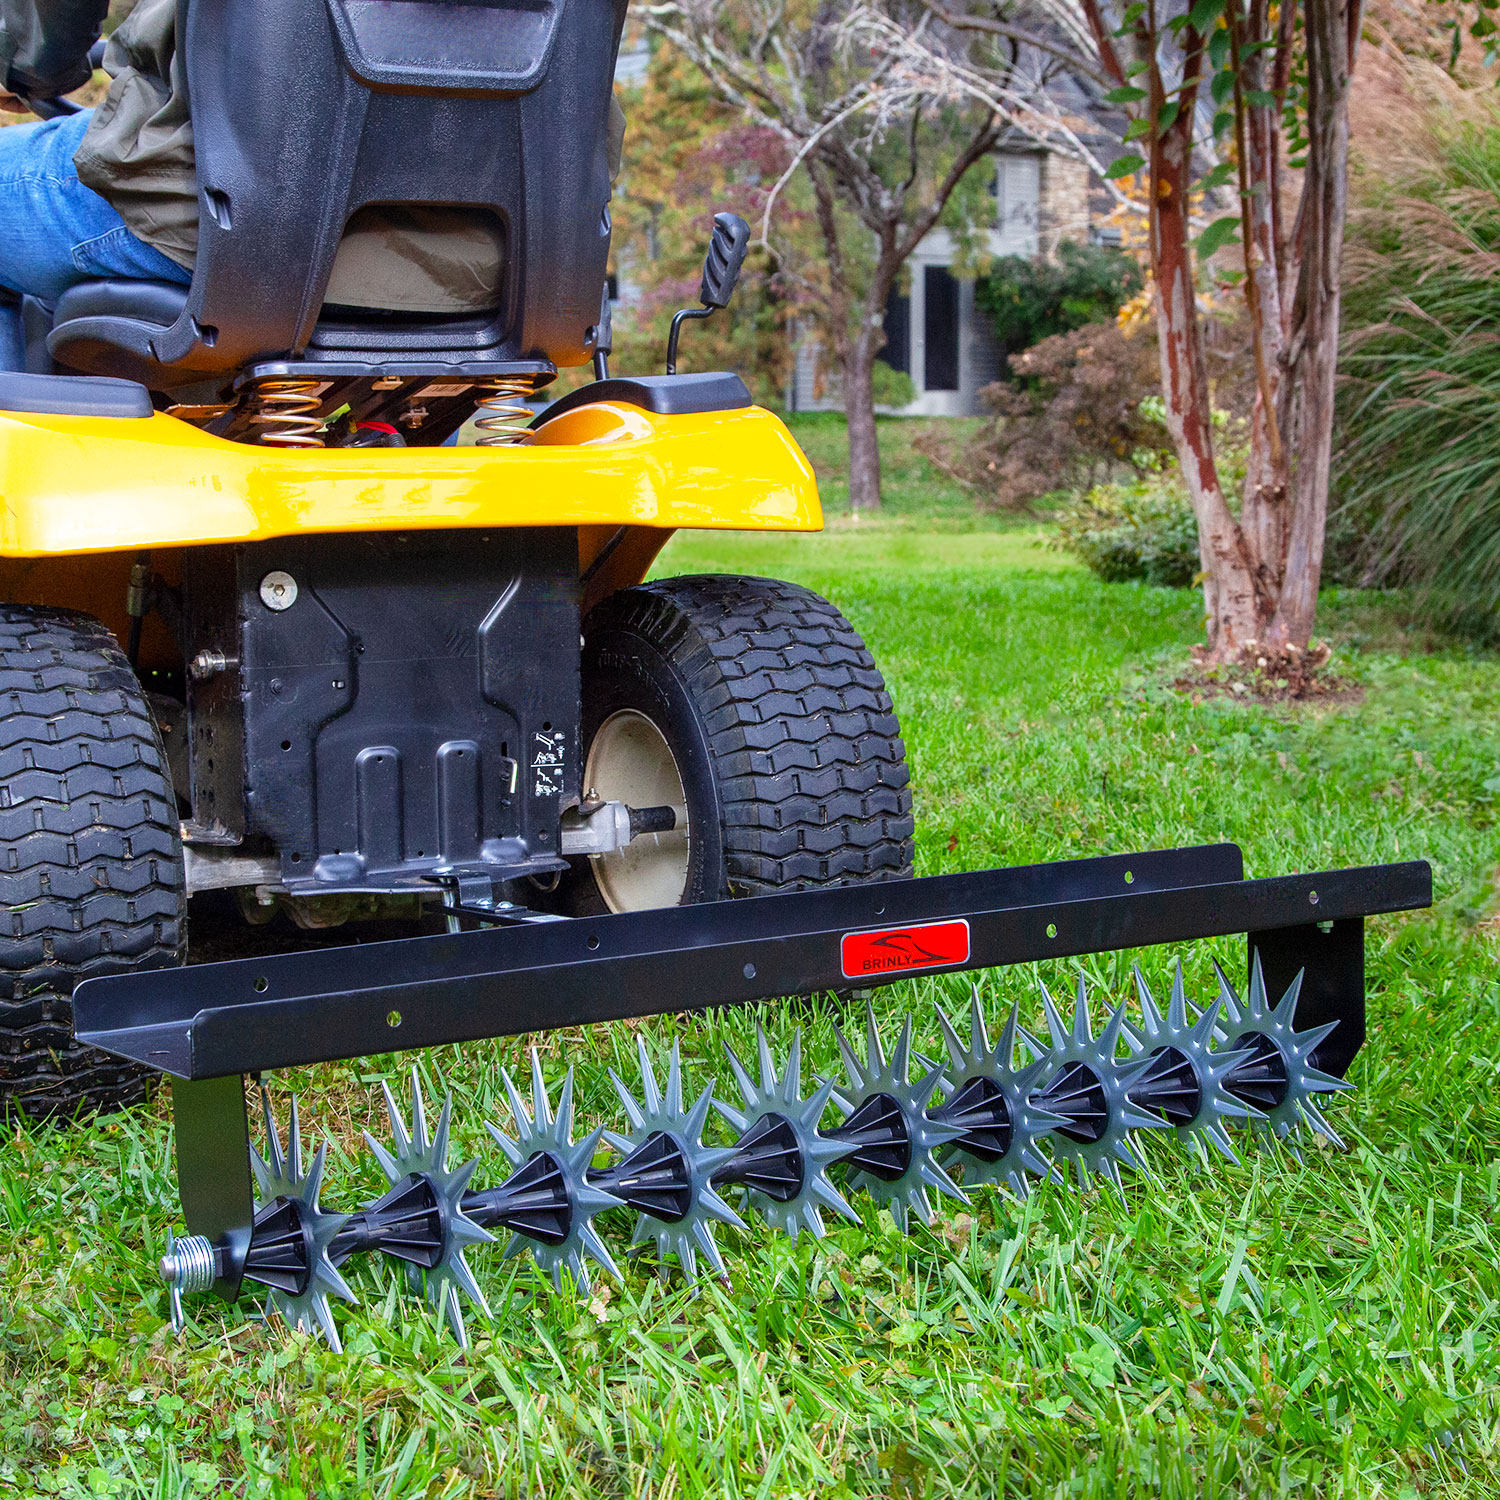 Tractor Tow-Behind Spike Soil Lawn Aerator Steel Garden Universal 40 in SA-400BH 